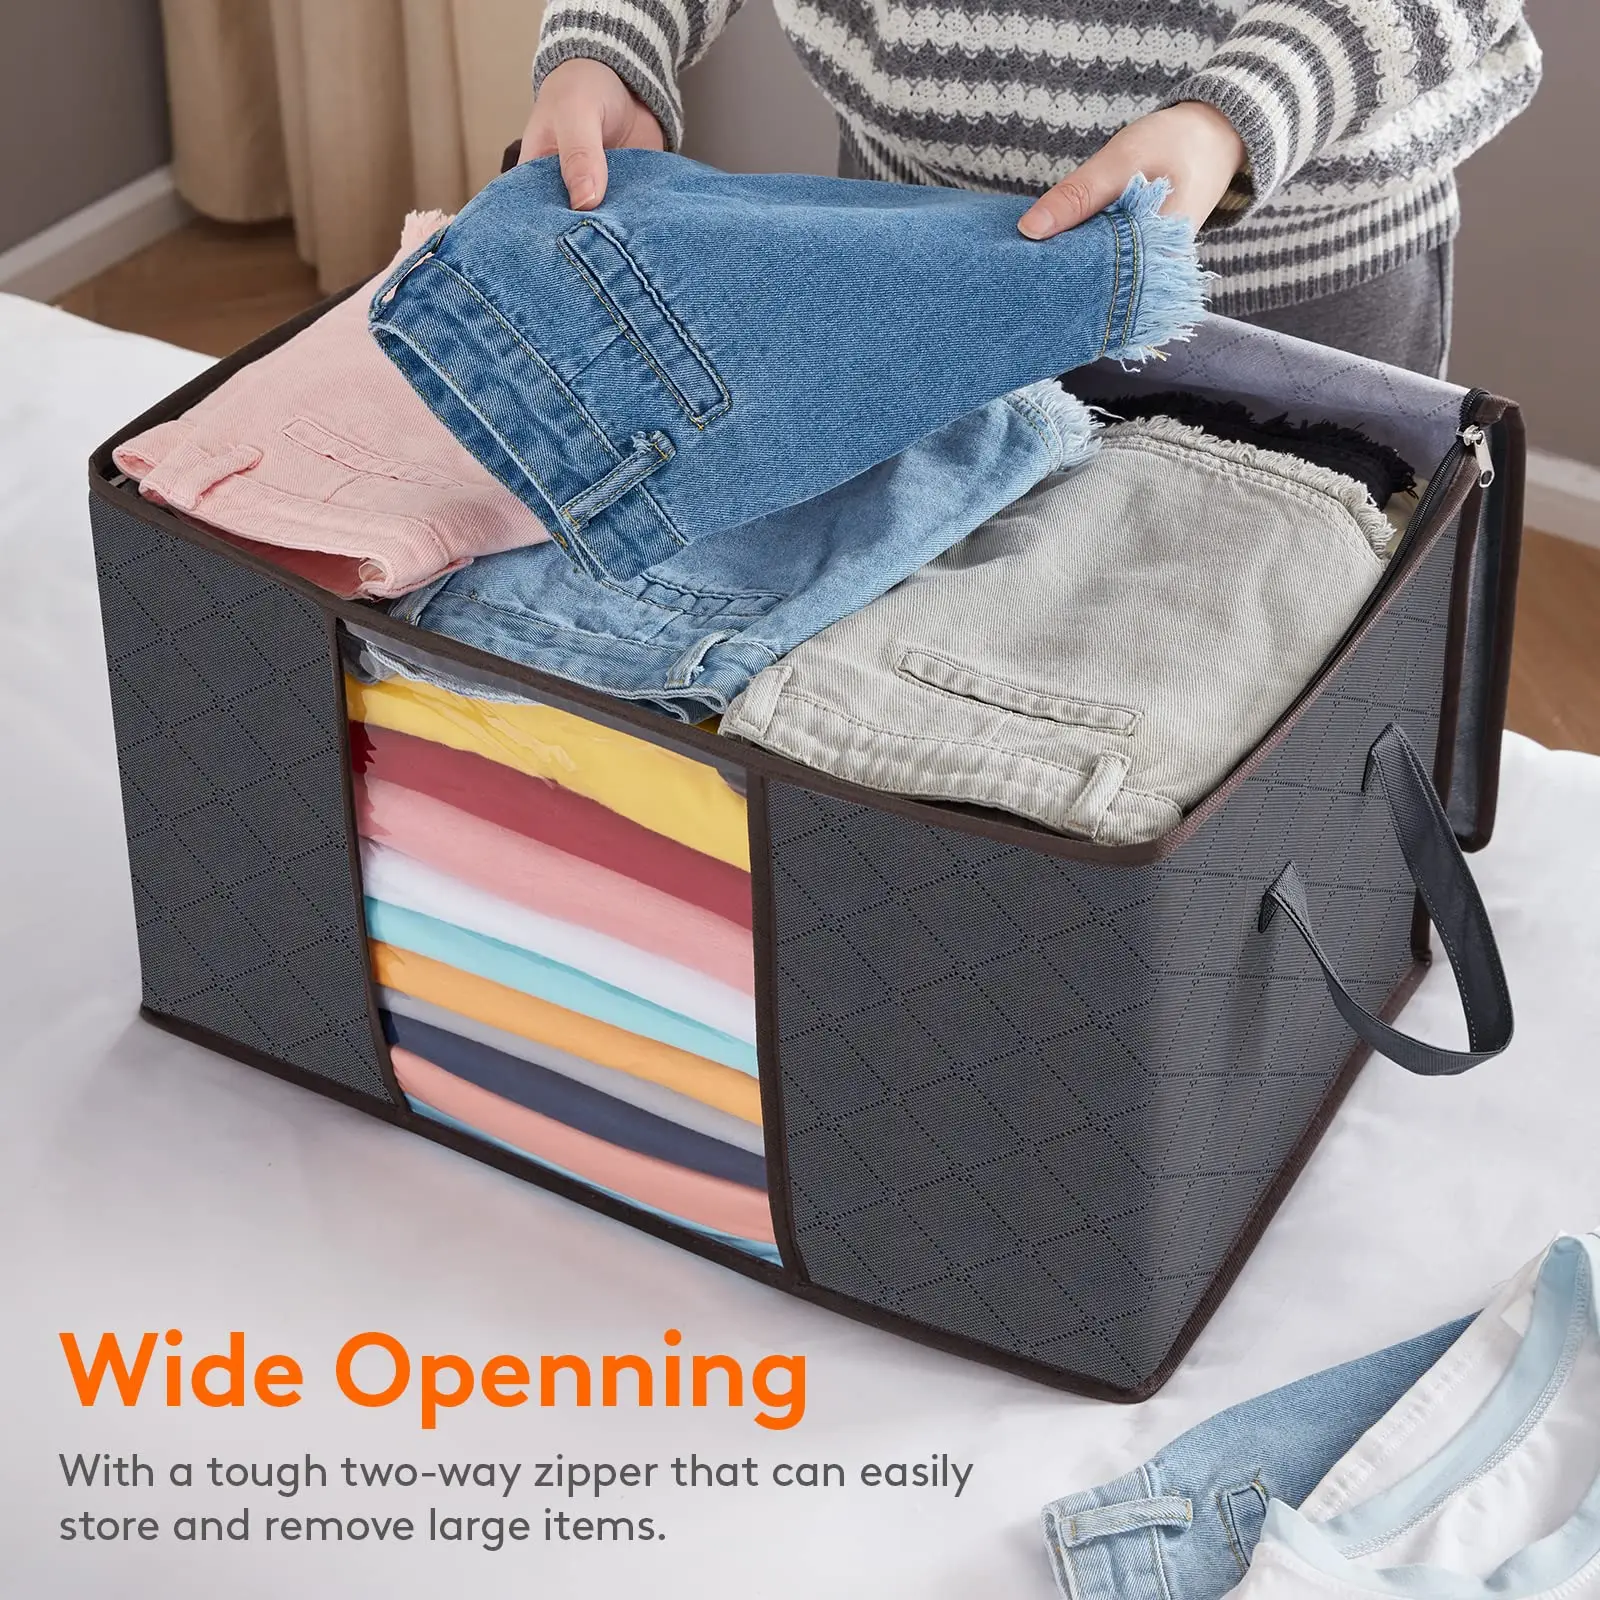 https://ae01.alicdn.com/kf/S1e1406a540f747c3af051b9cc5bdc734G/6-Pcs-Large-Capacity-Clothes-Storage-Bag-Organizer-with-Reinforced-Handle-Thick-Fabric-for-Comforters-Blankets.jpg